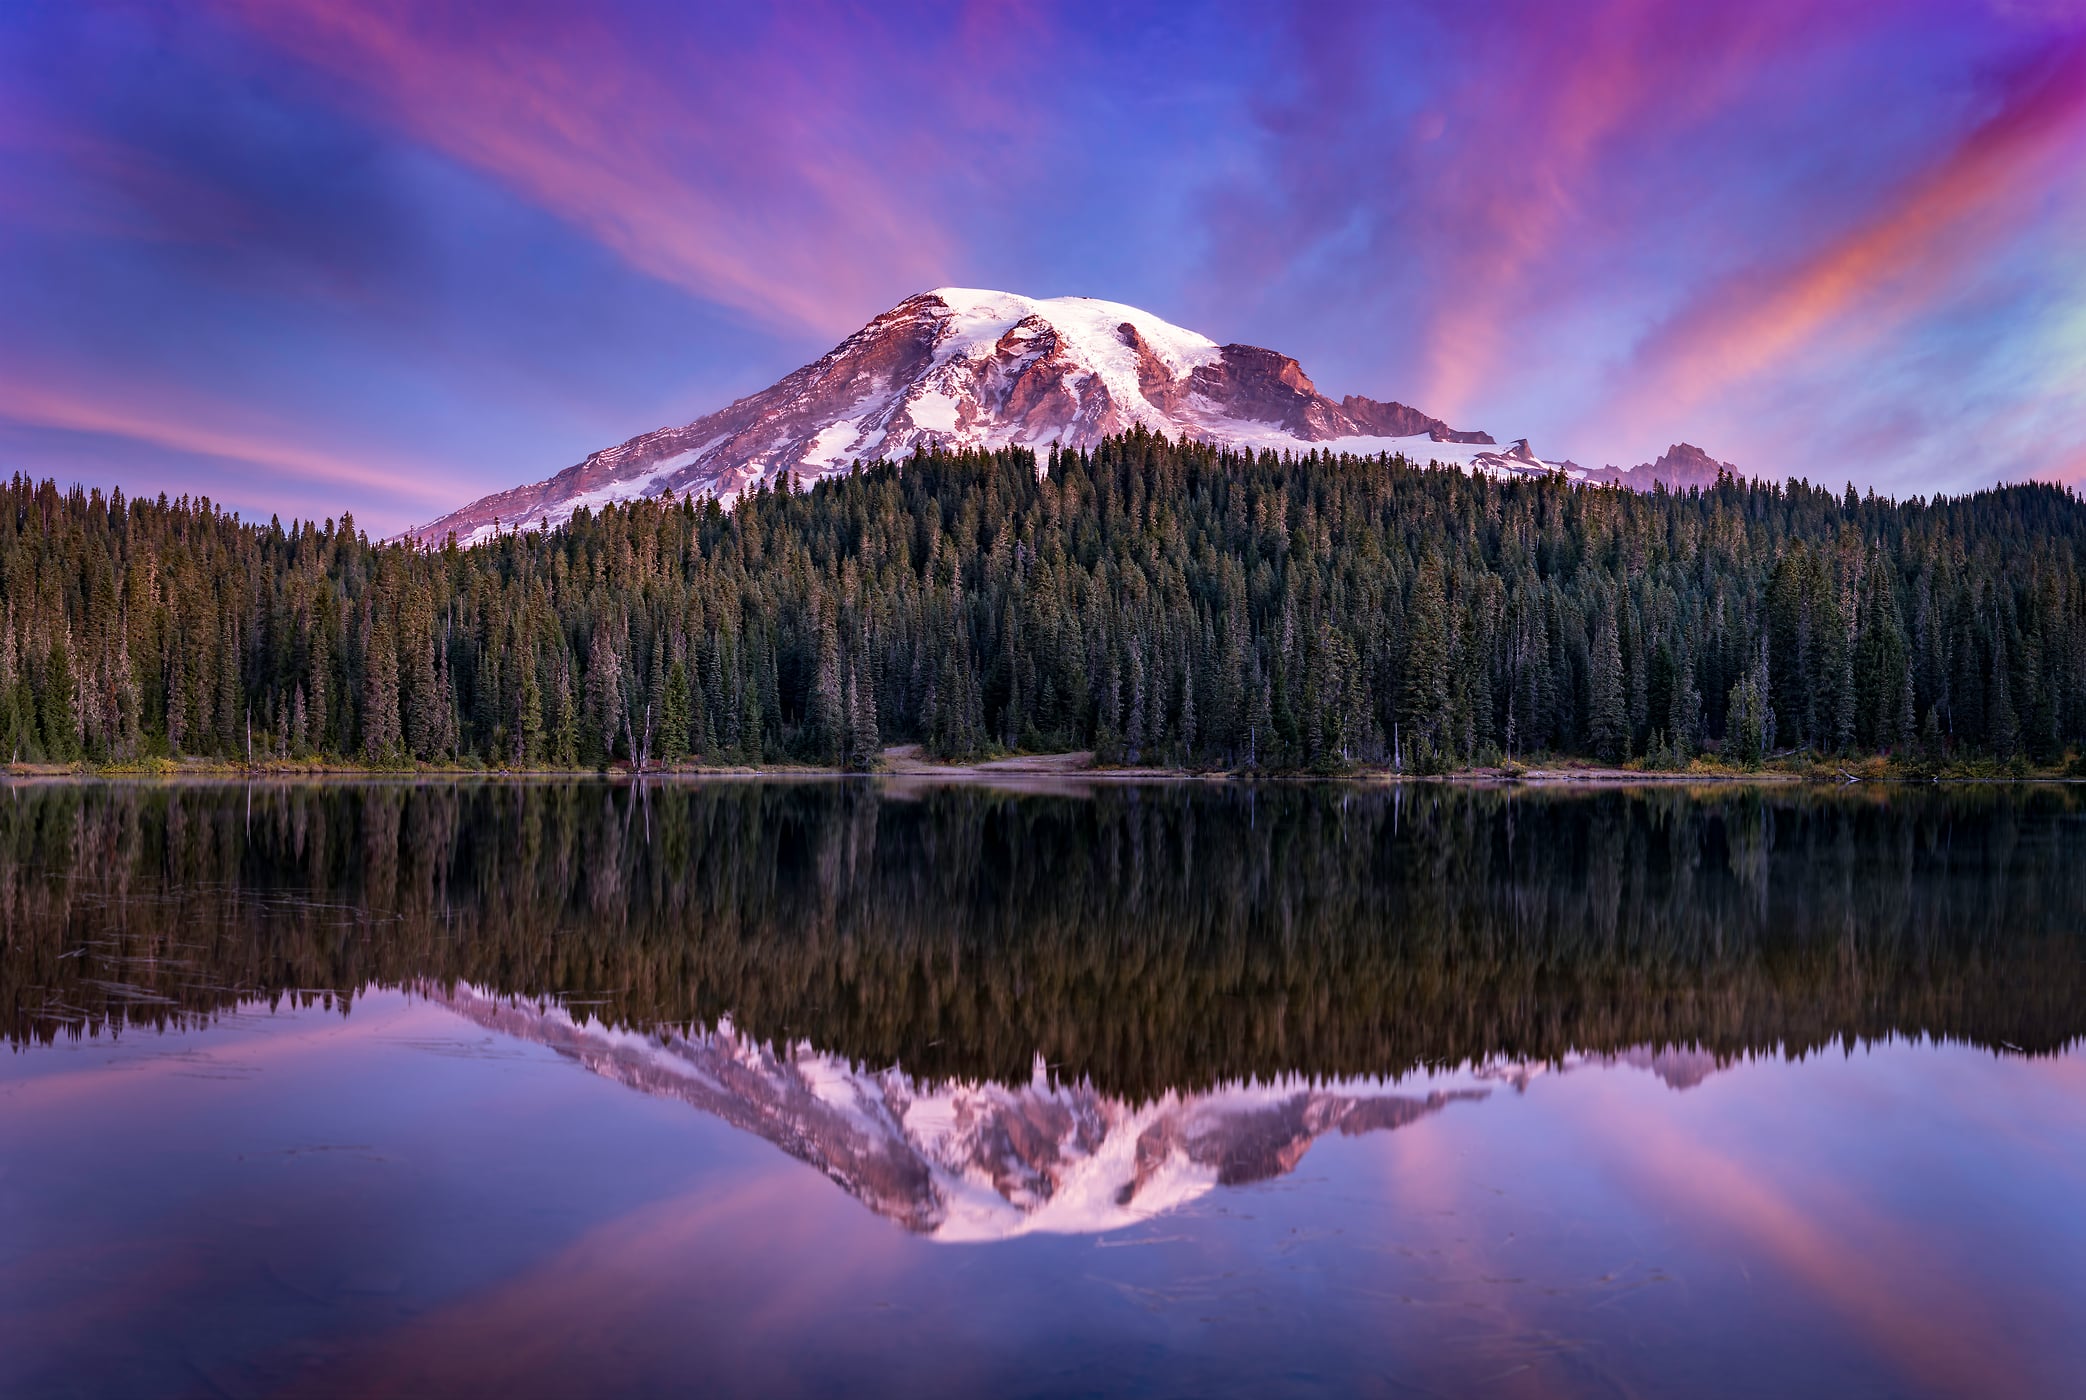 333 megapixels! A very high resolution, large-format VAST photo print of Mount Rainier at sunrise with a forest and lake reflecting the mountain; landscape photo created by Justin Katz at Reflection Lake in Mount Rainier National Park, Washington